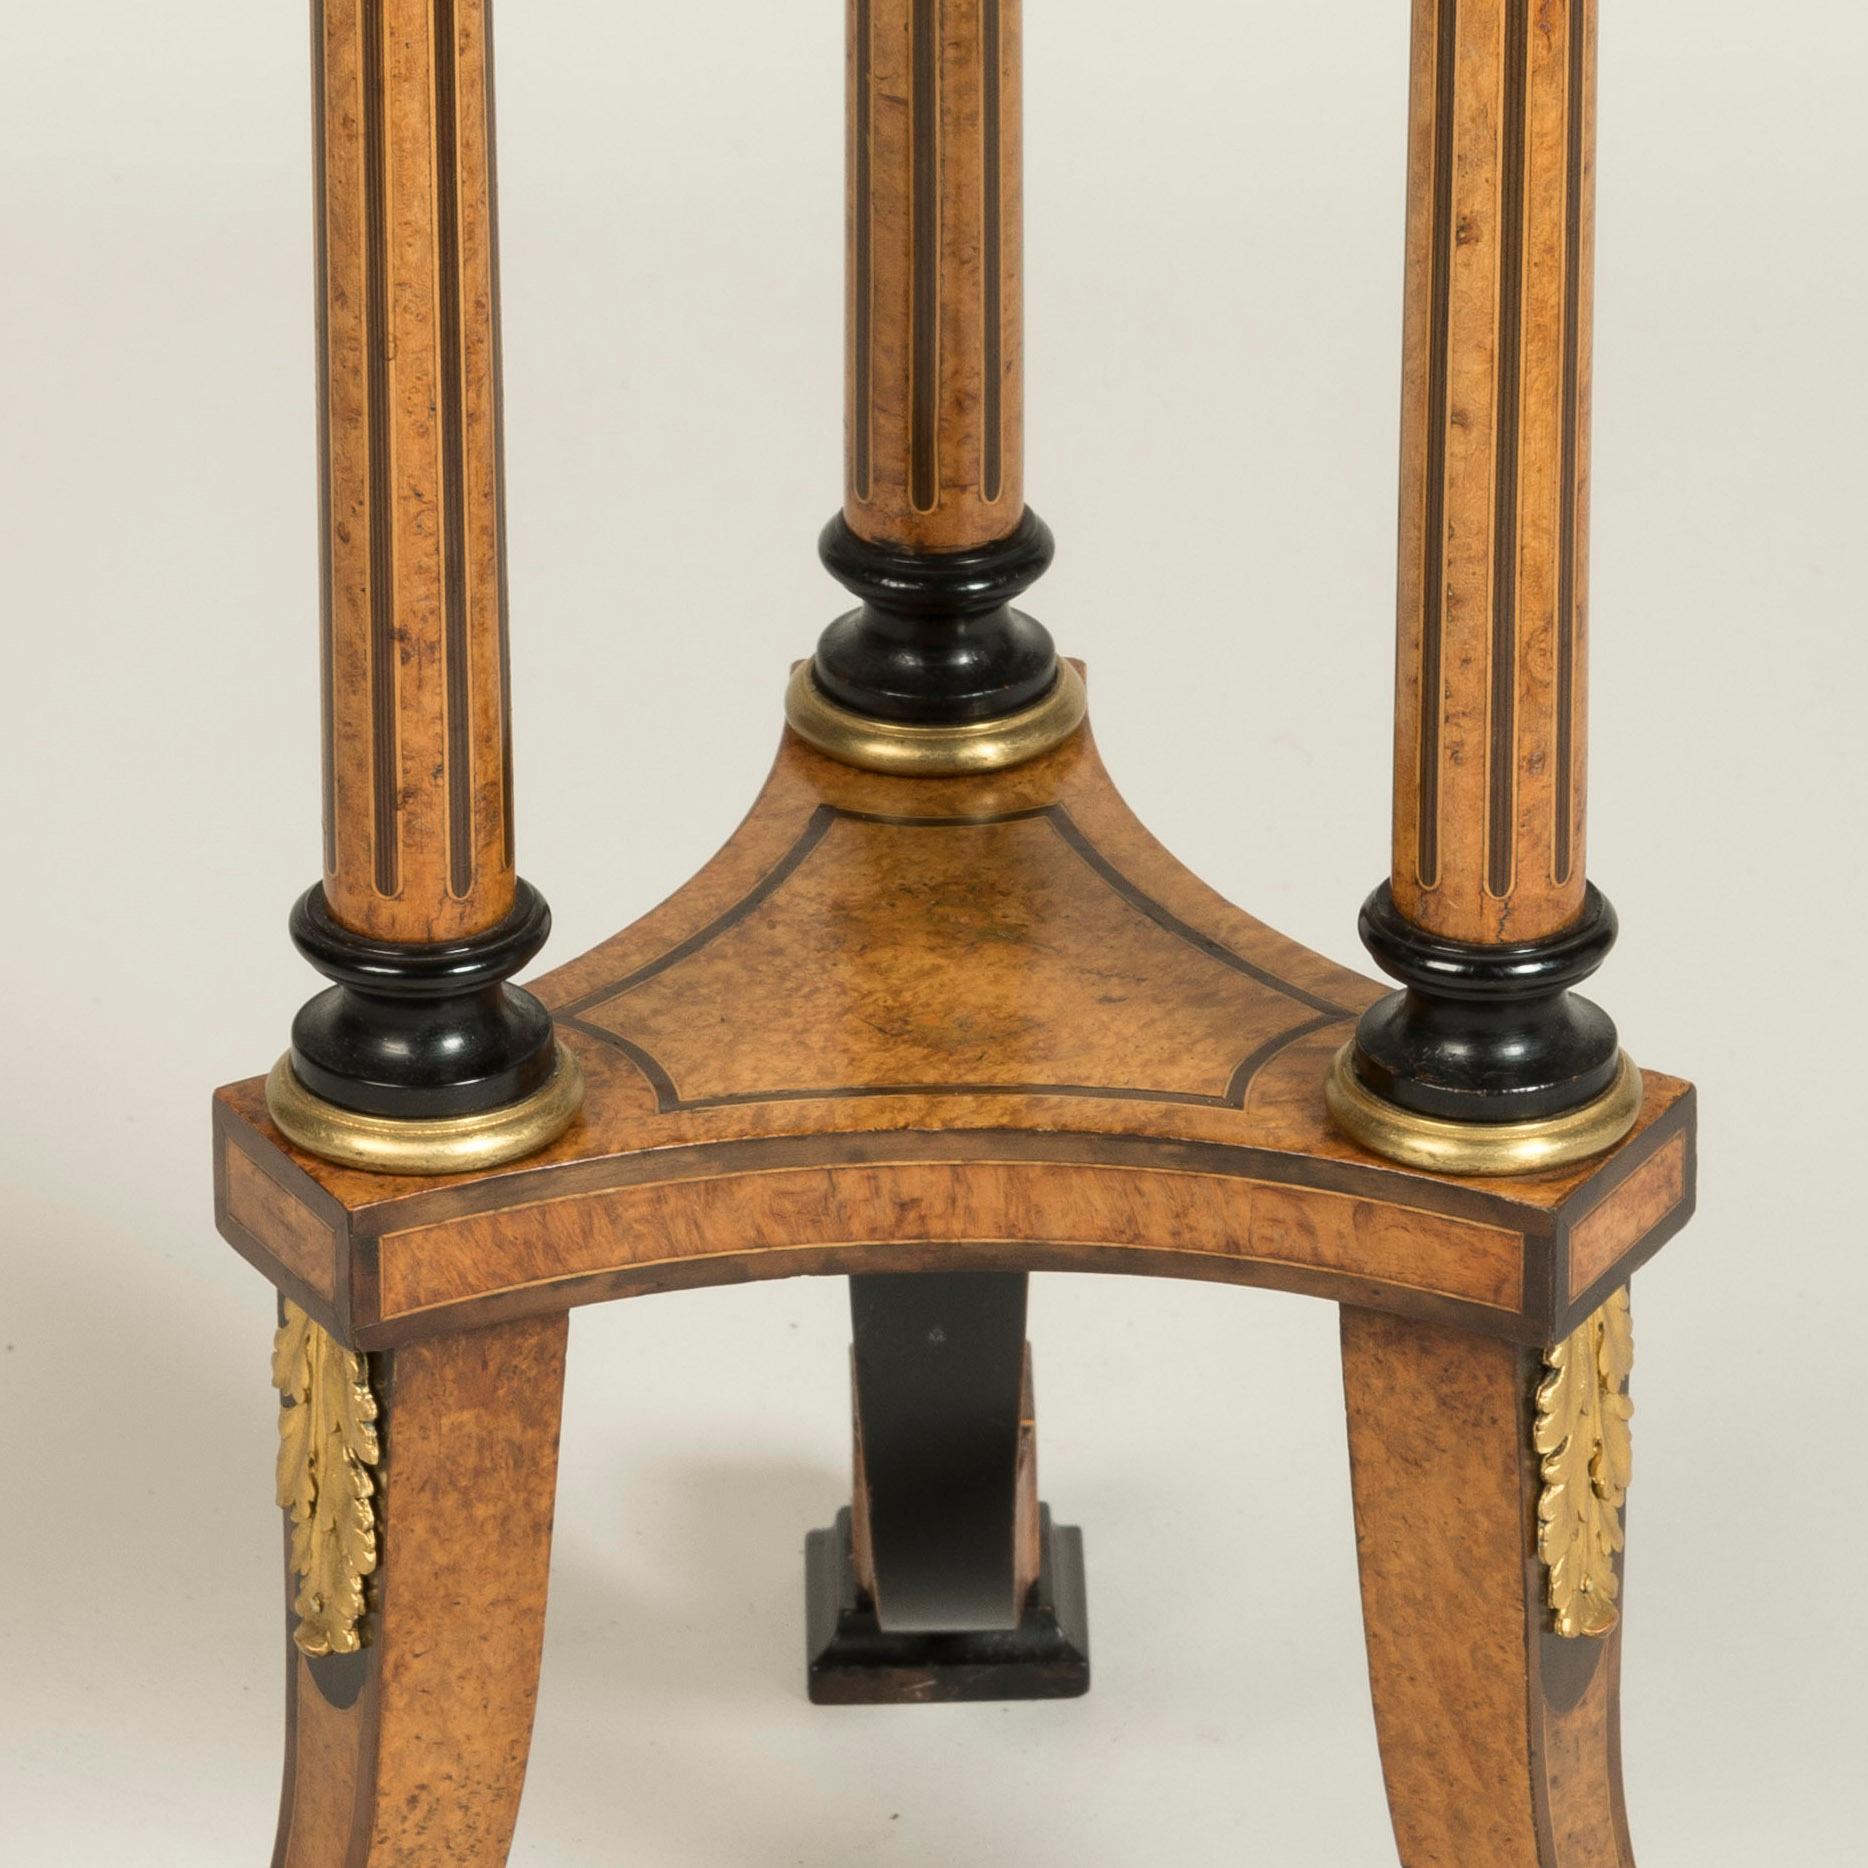 19th Century English Burr Walnut Tripod Table by Gregory & Co of London For Sale 2